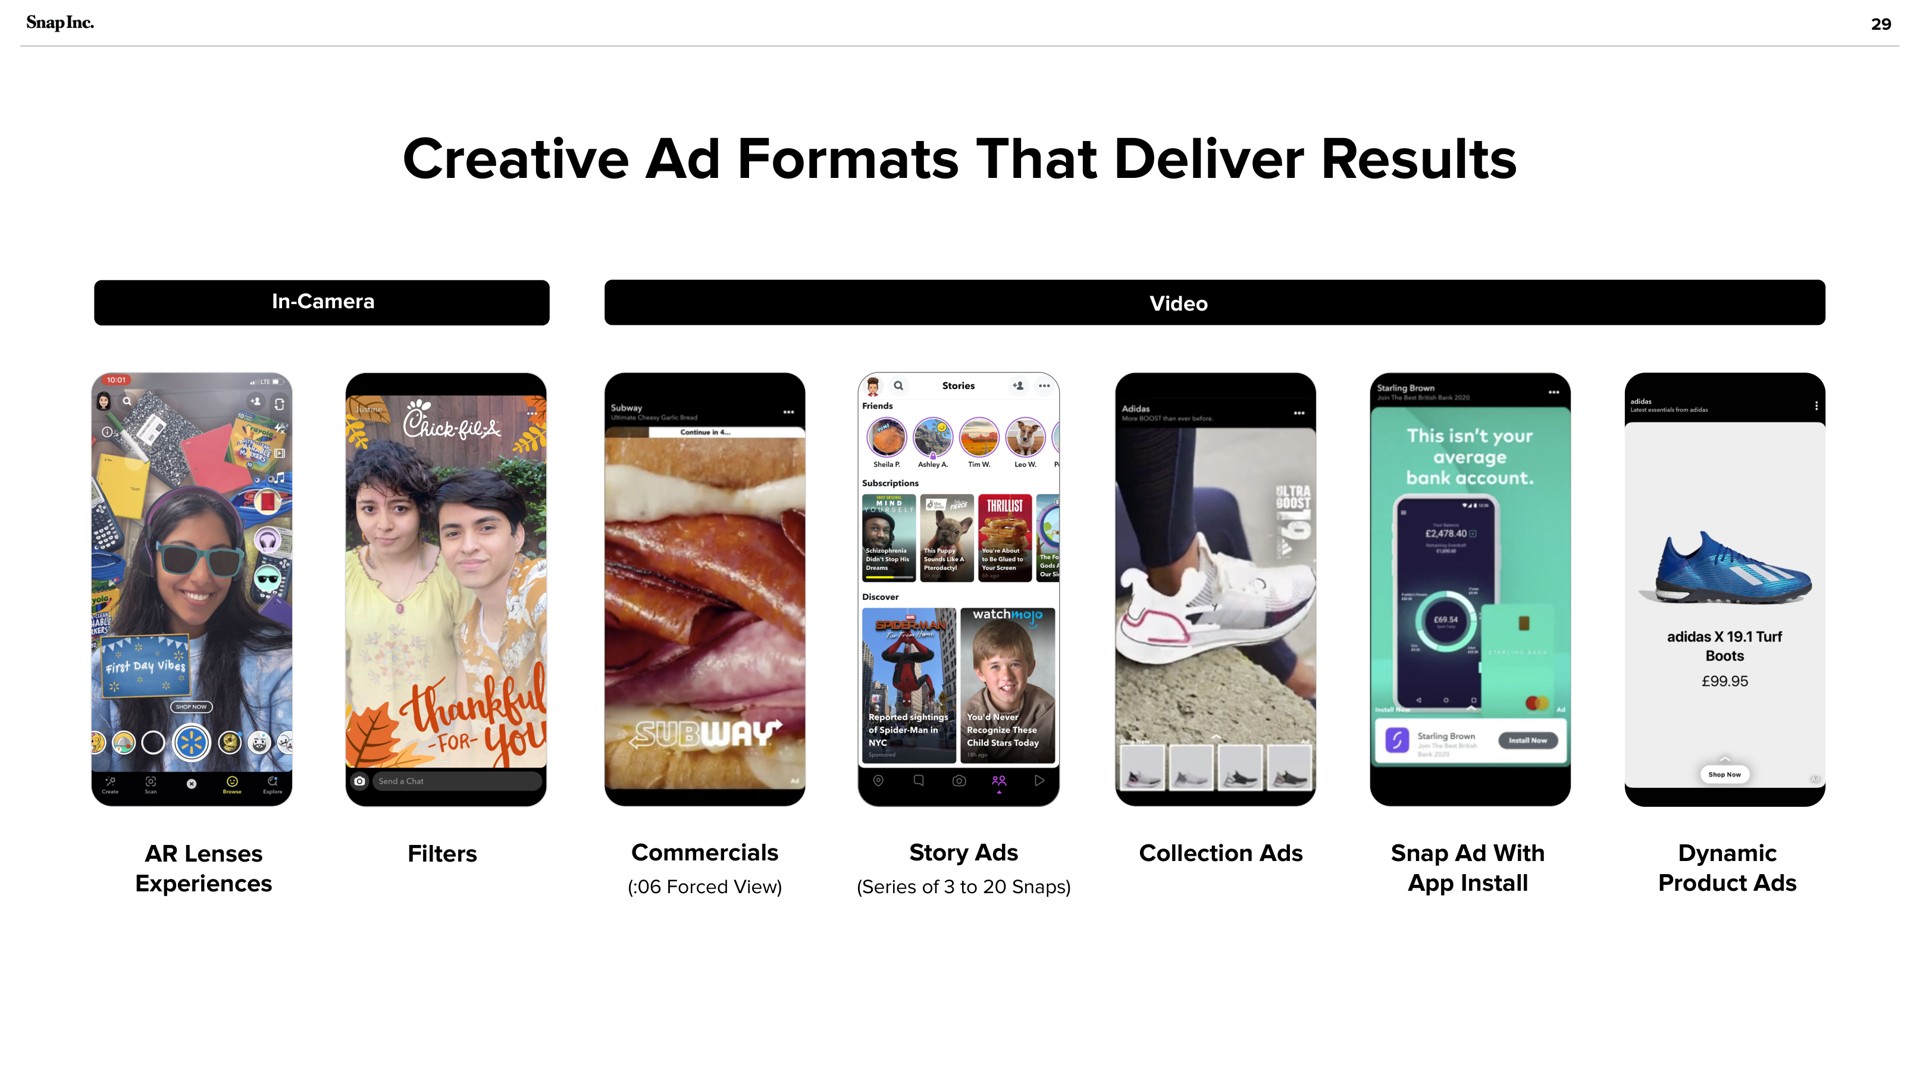 creative formats that deliver results tree | Snap Inc